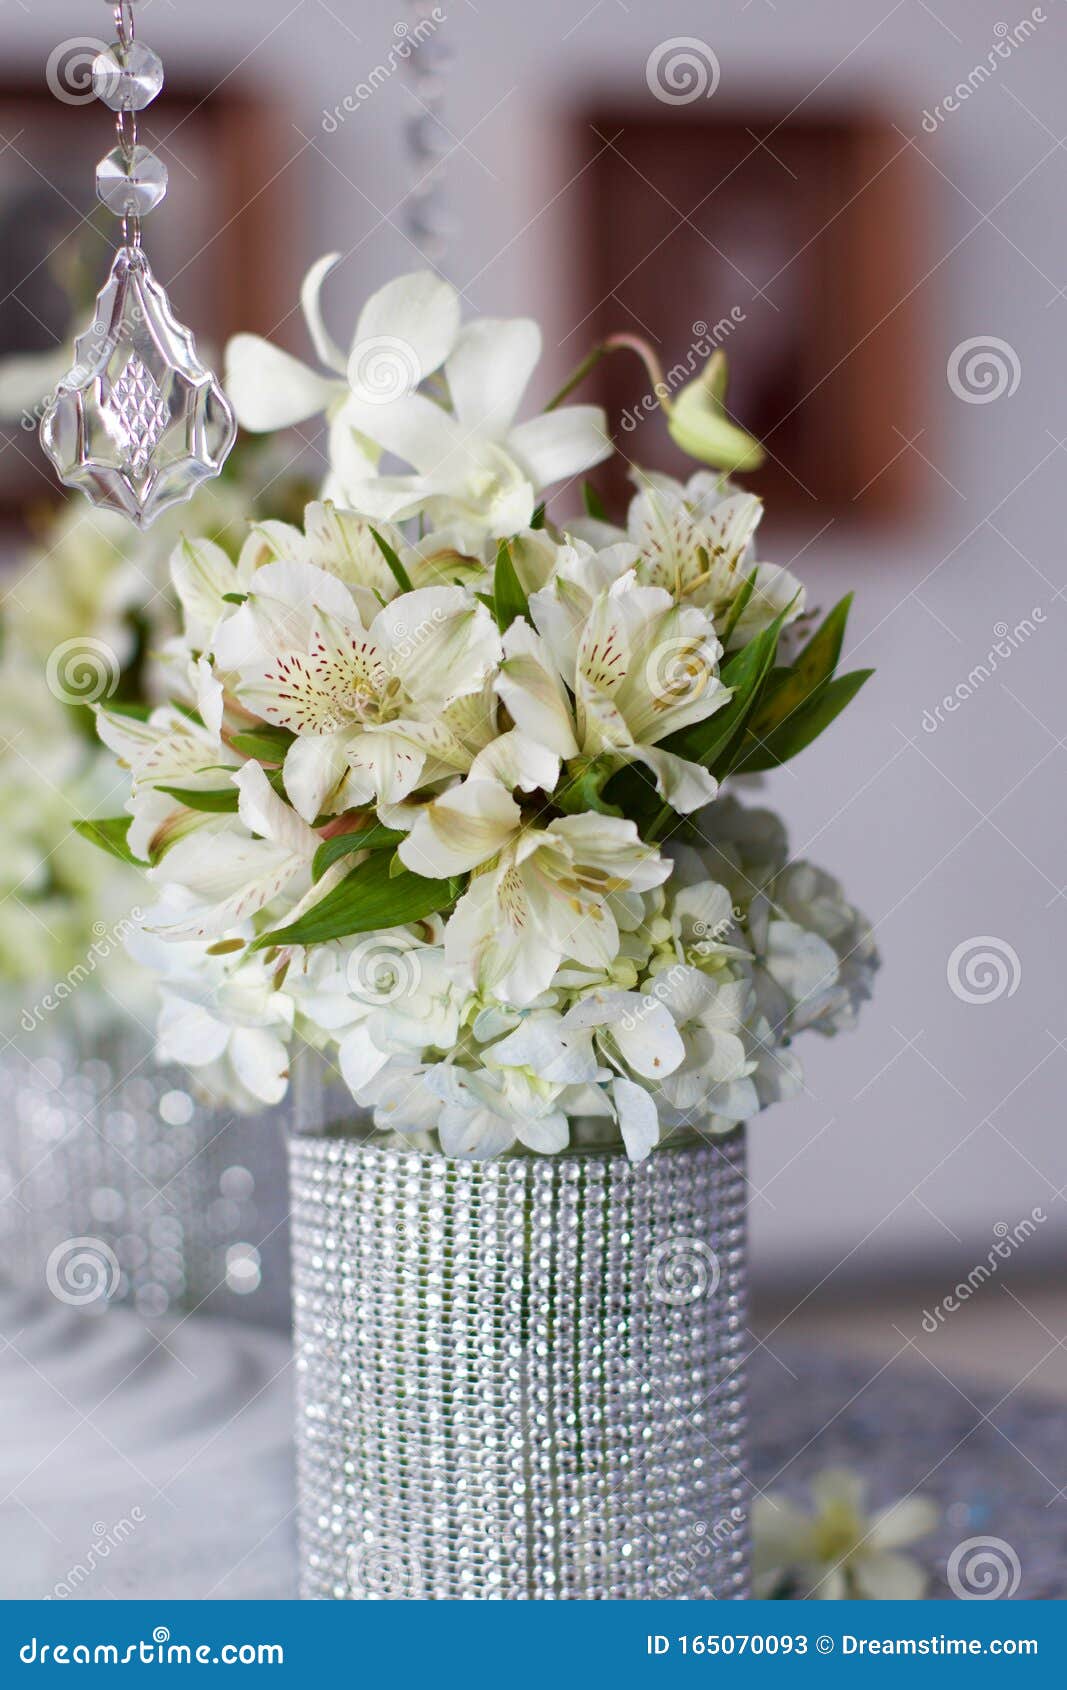 silver centerpiece with flowers